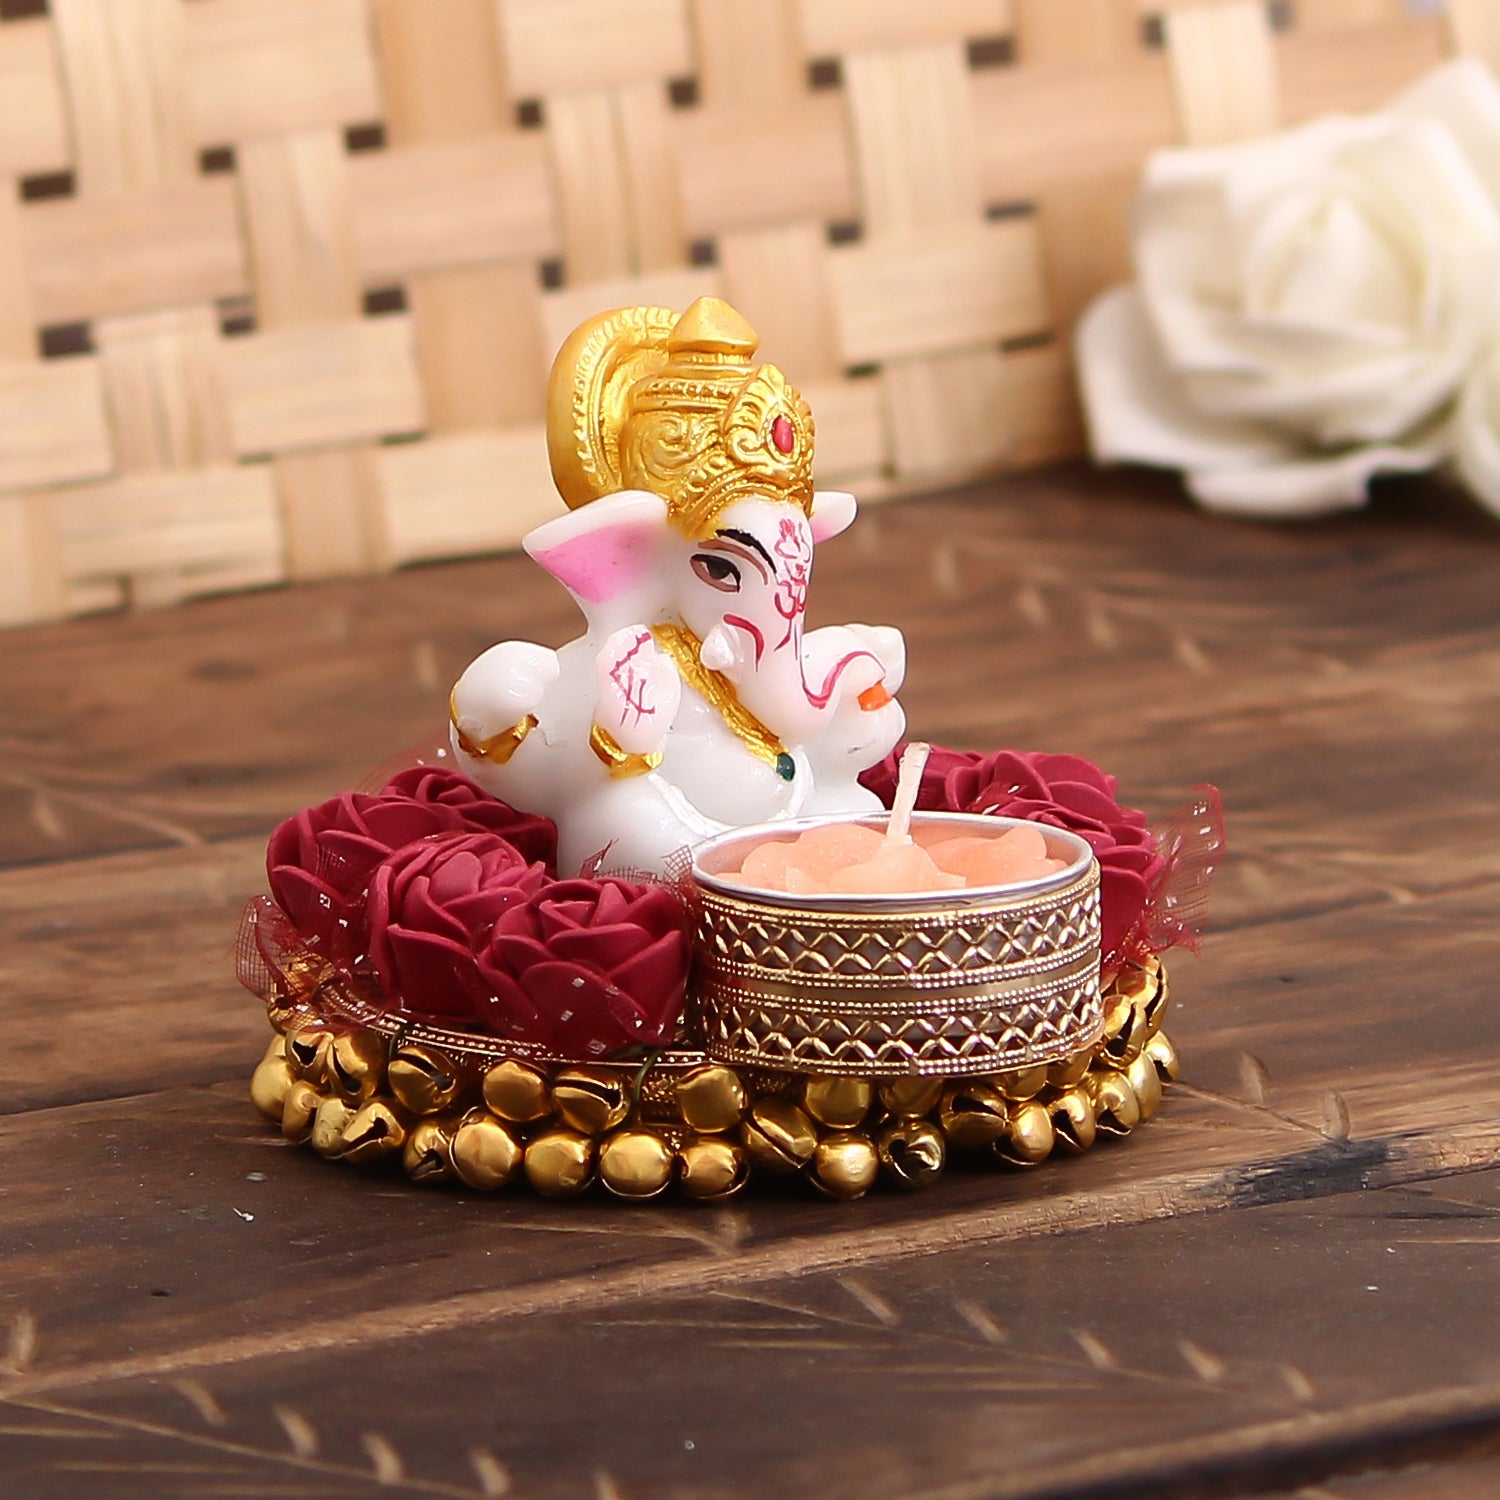 Metal and Polyresin Lord Ganesha Idol on Decorative Plate with Tea Light Candle Holder